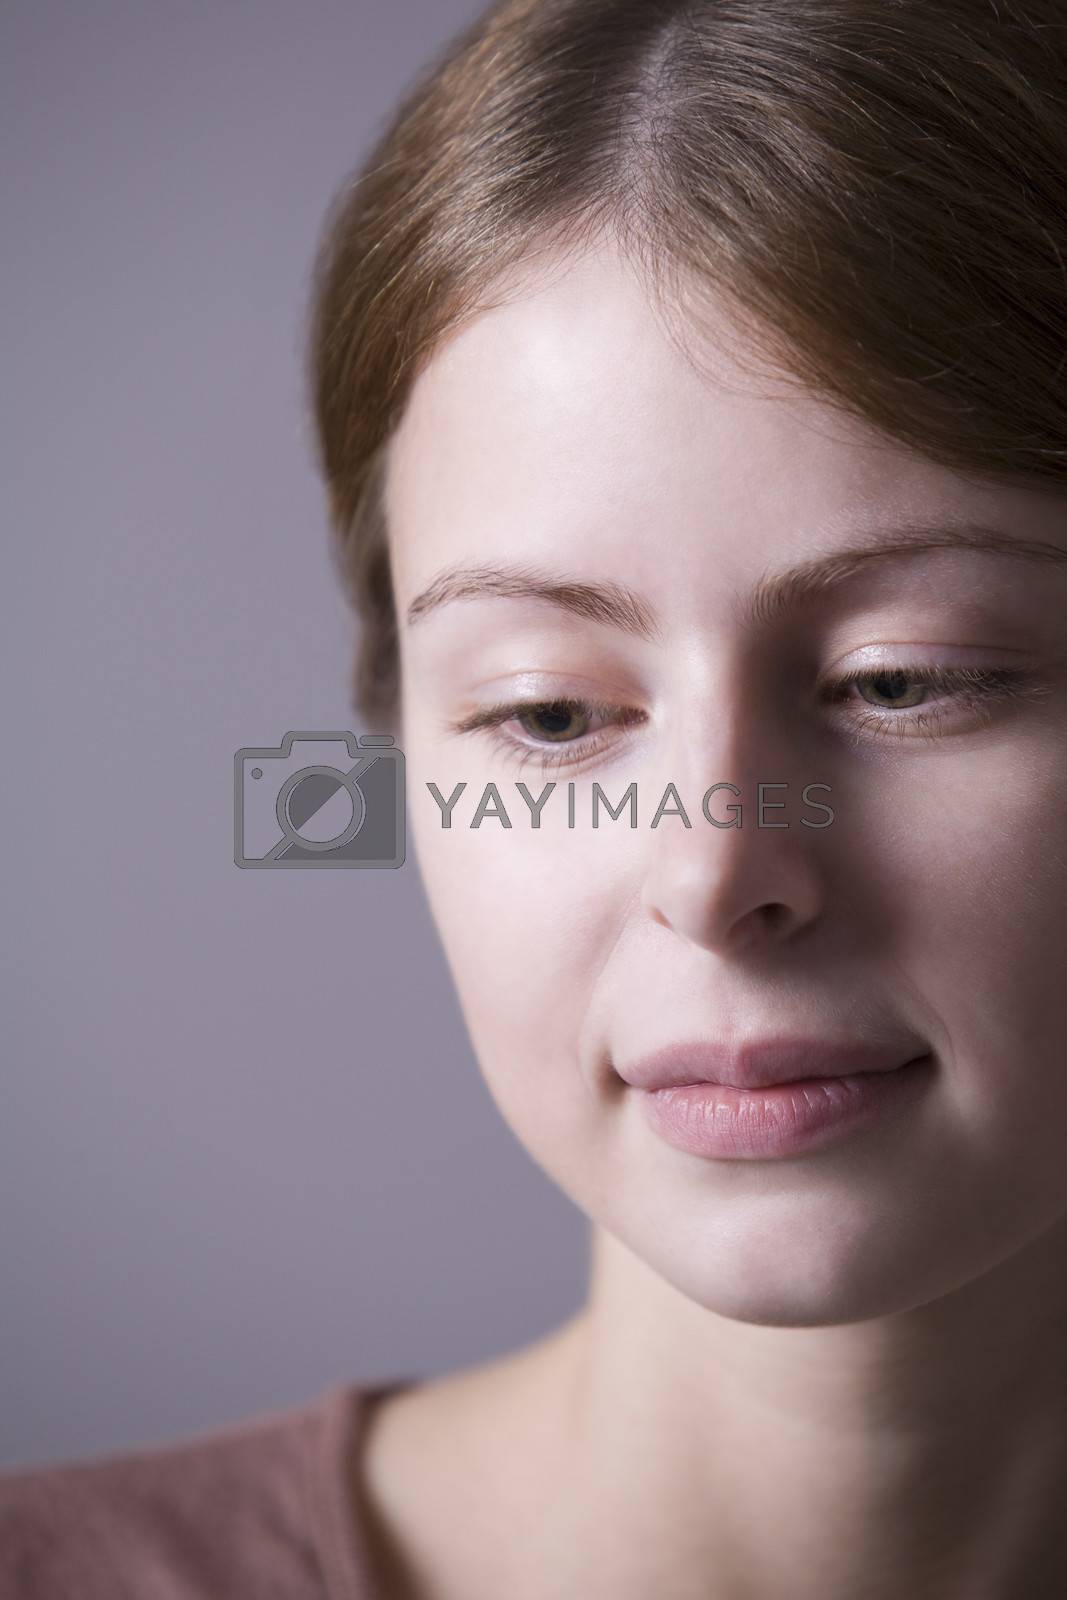 Royalty free image of Pensive young woman close-up  by moodboard